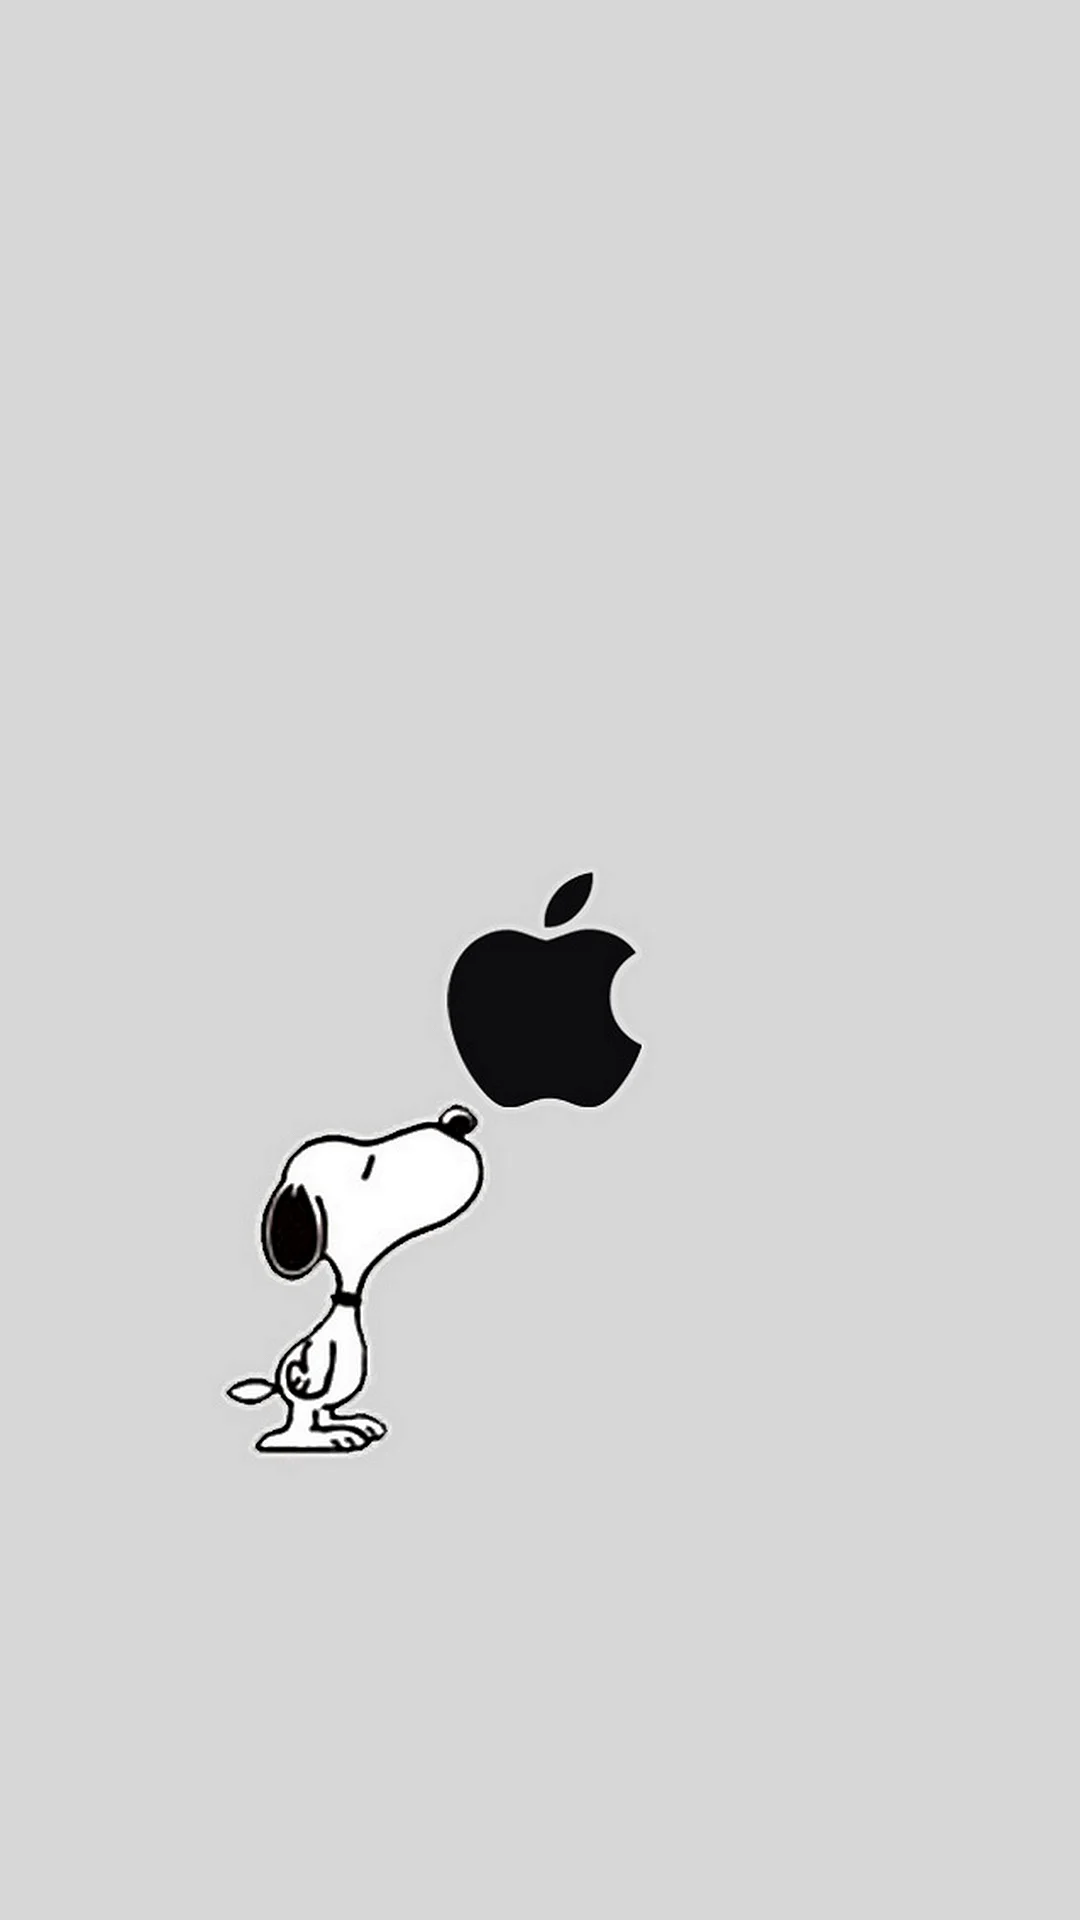 Snoopy Apple Wallpaper For iPhone